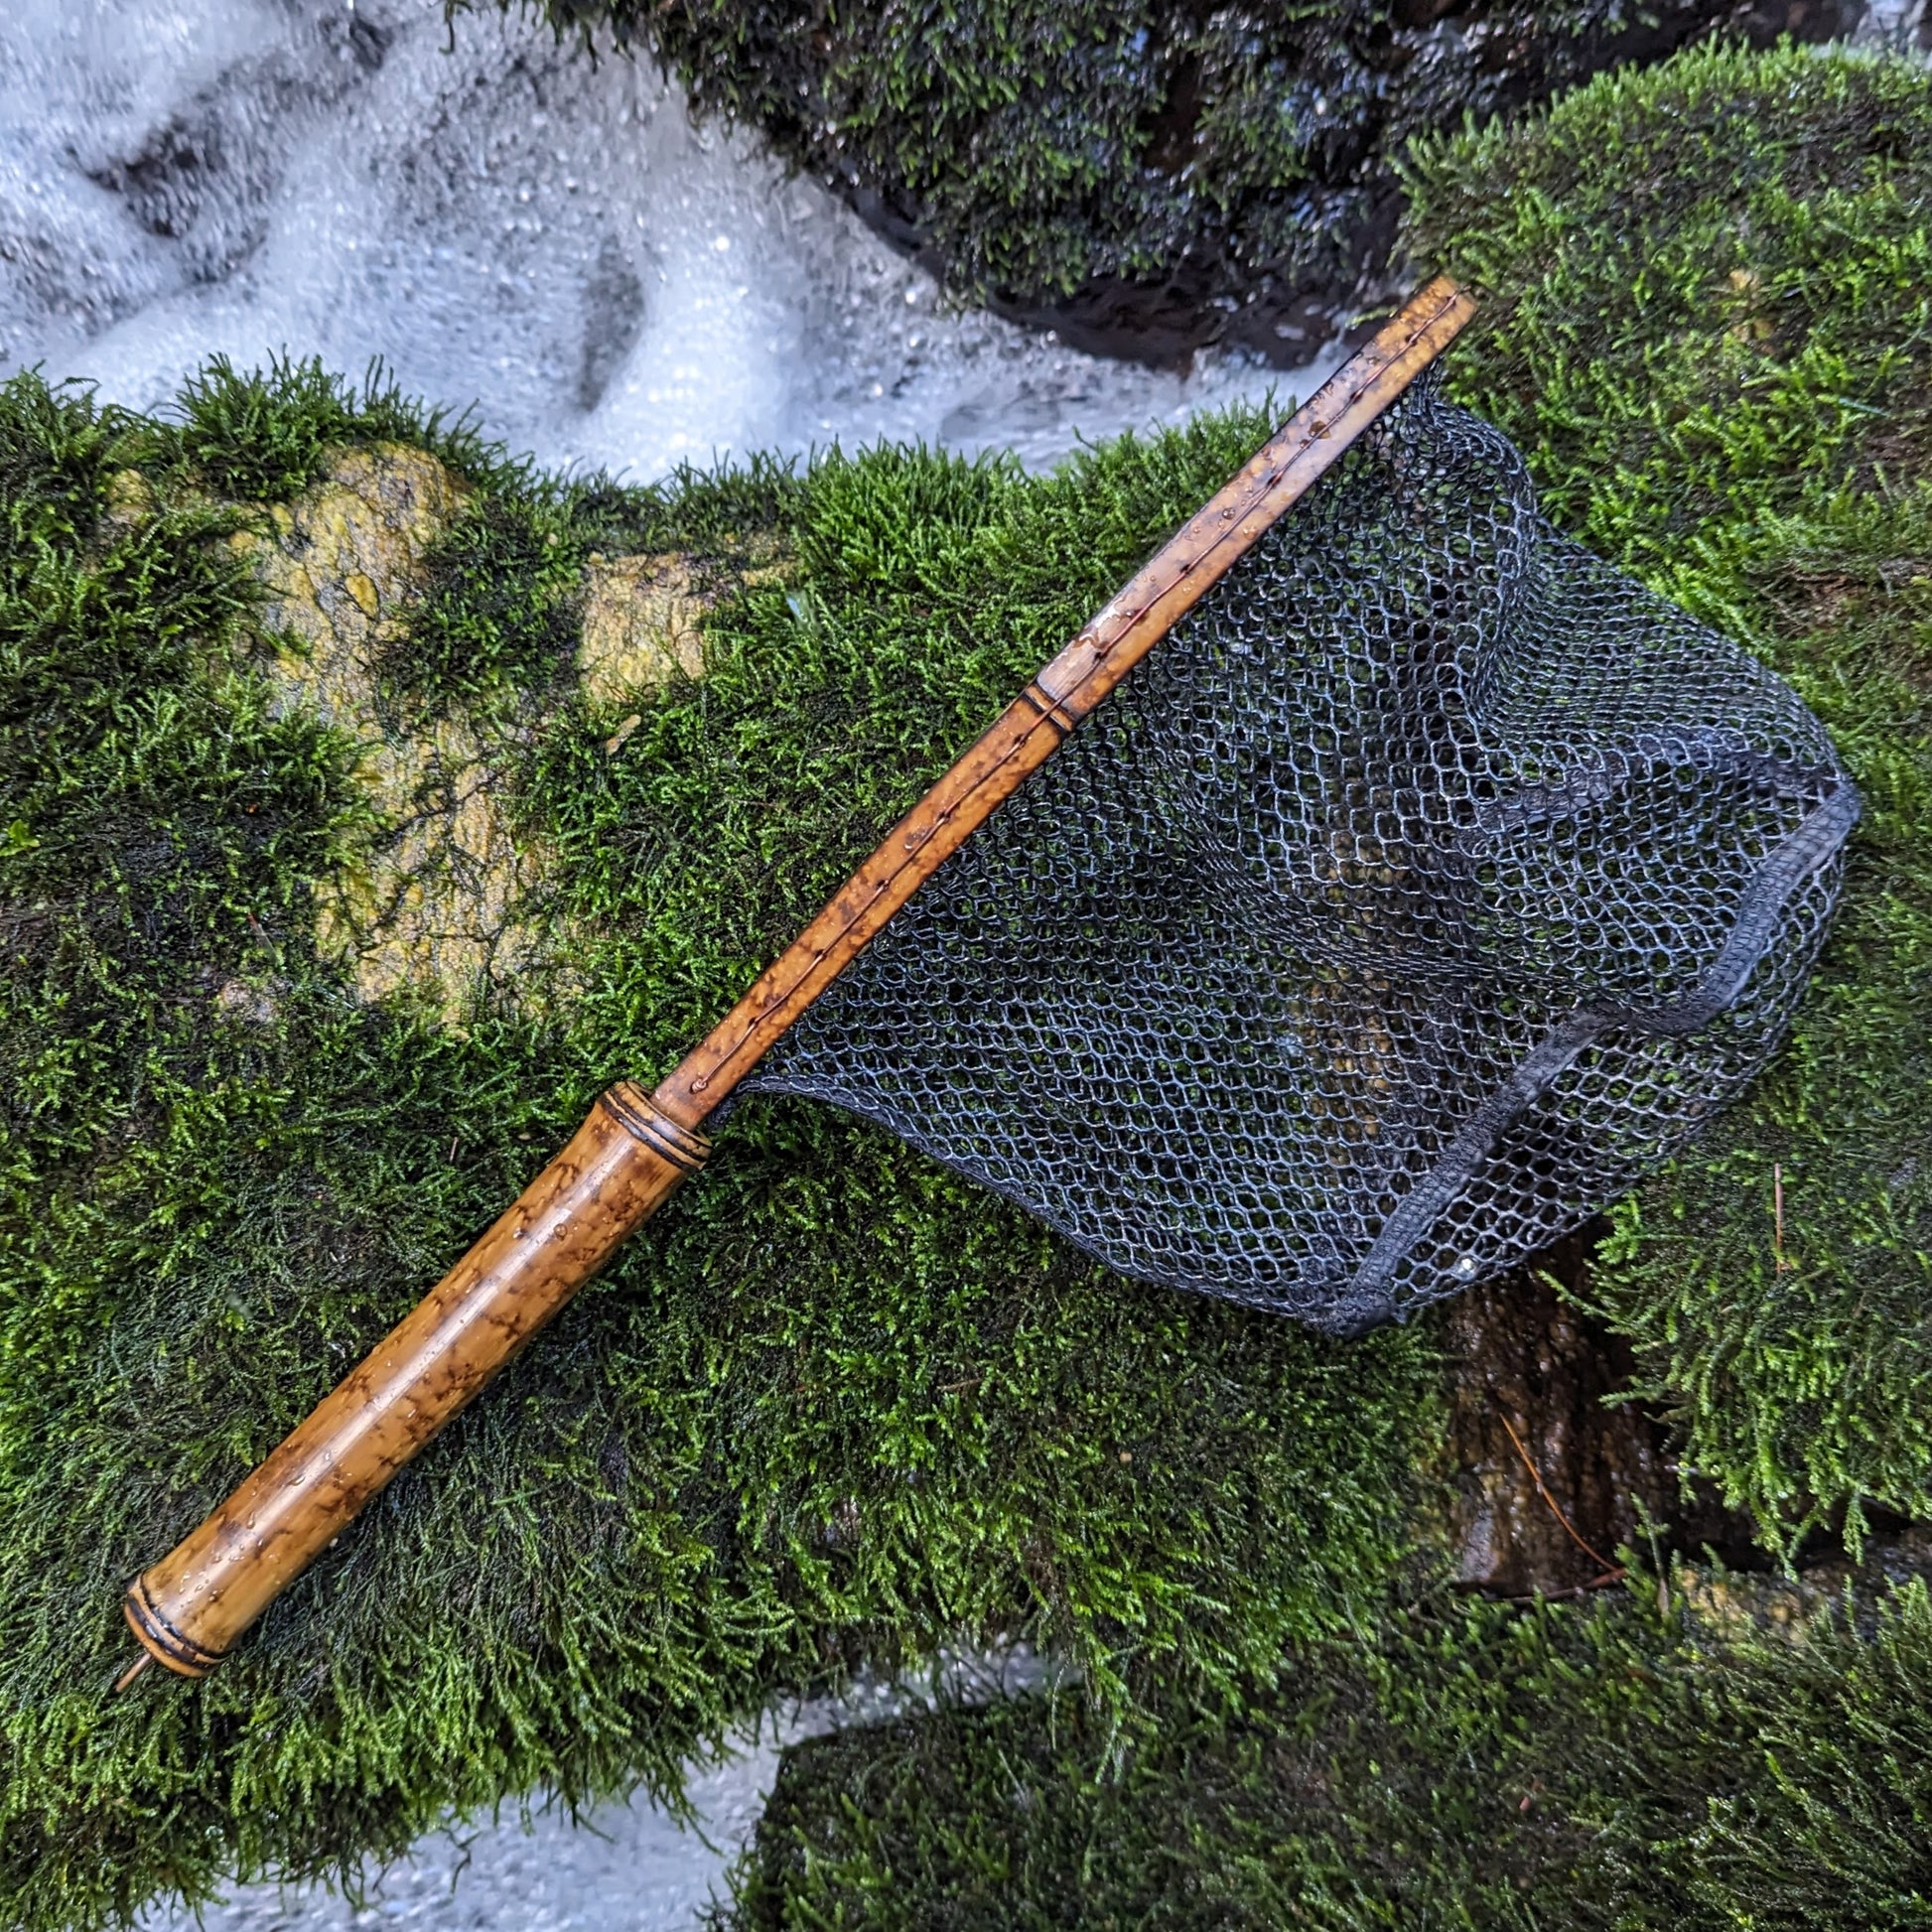 Speck Bamboo + Copper Fly Fishing Net - Smallest on The Market